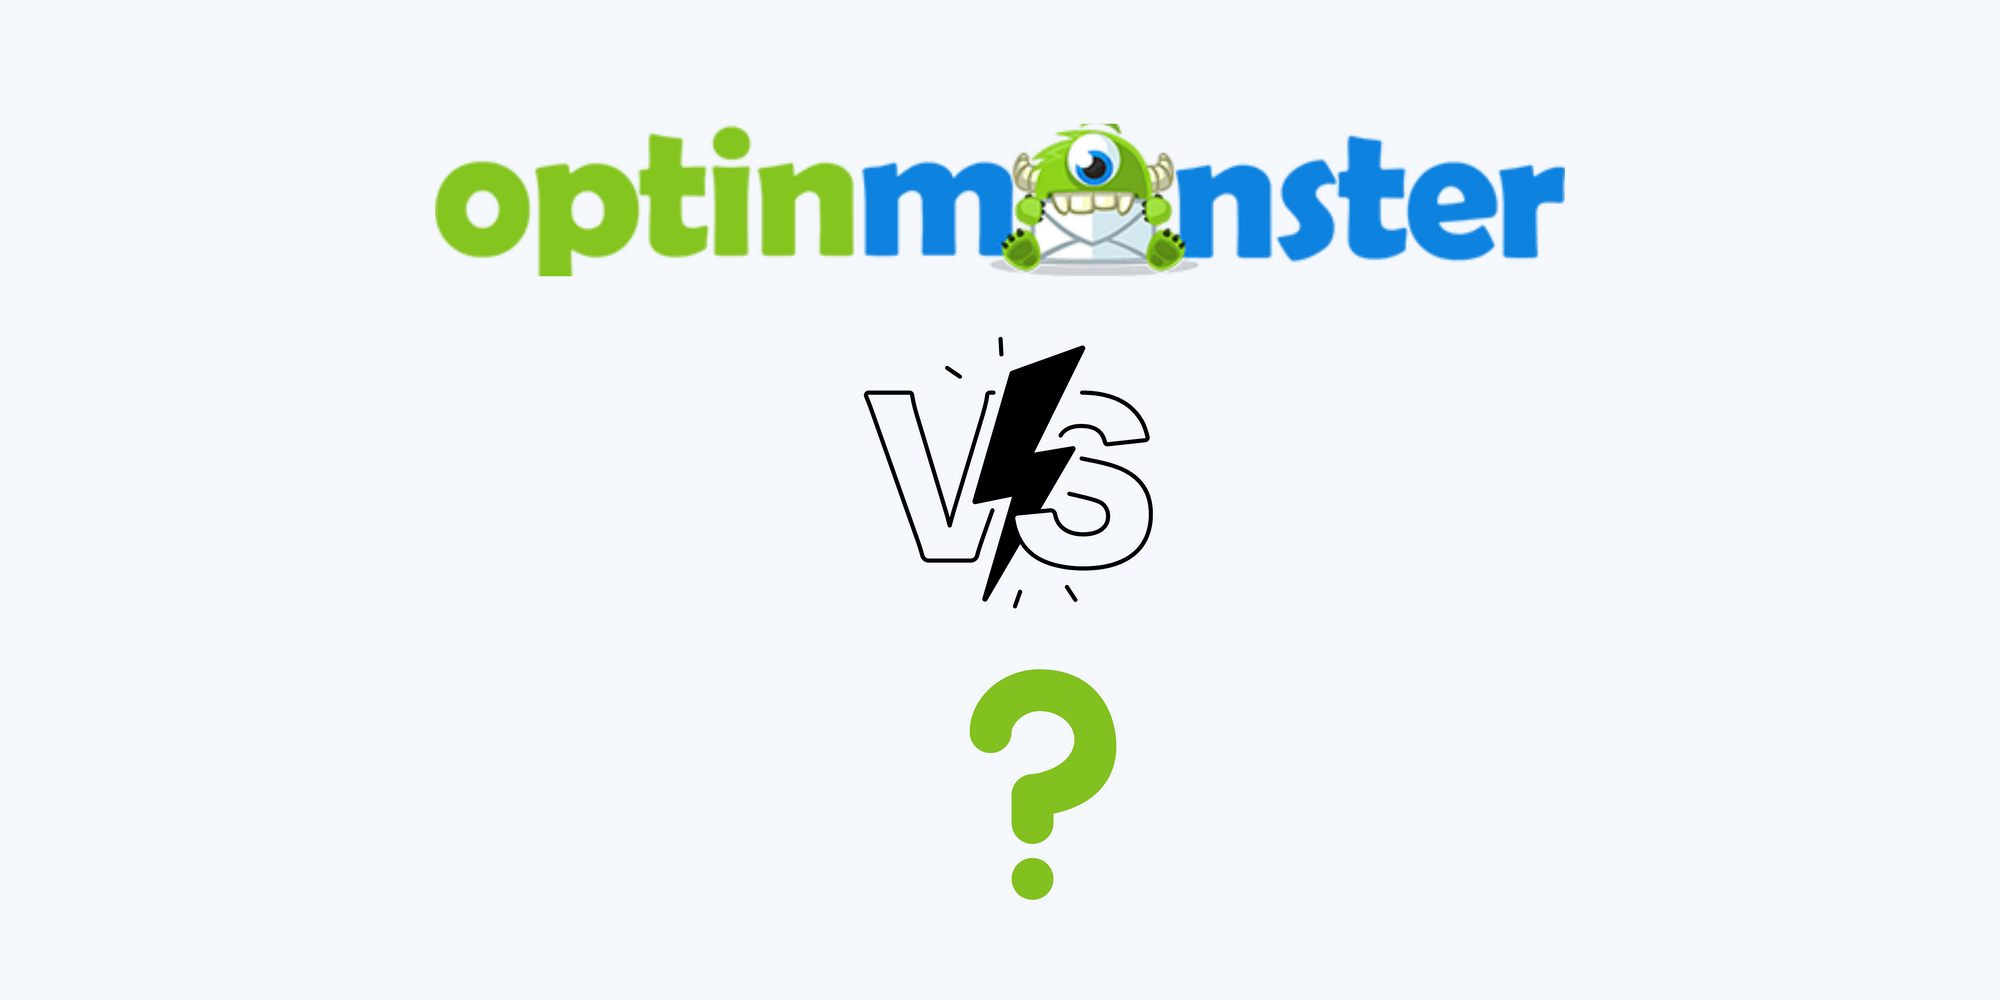 OptinMonster icon, versus symbol and a question mark to mention the alternatives on blue background